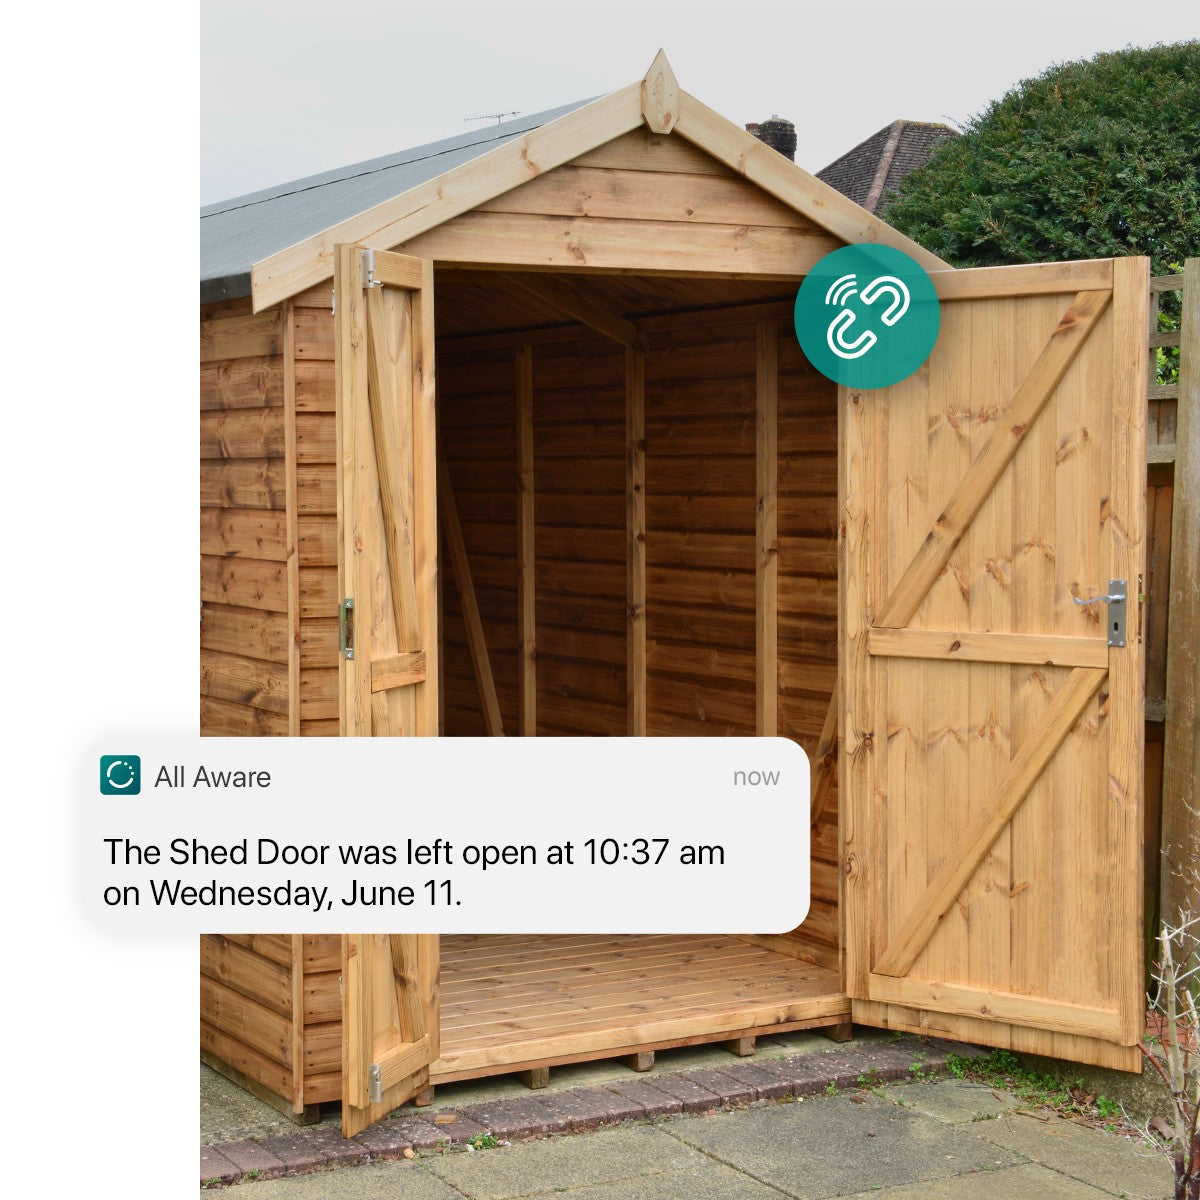 Get reminders when your shed door is close or left opened